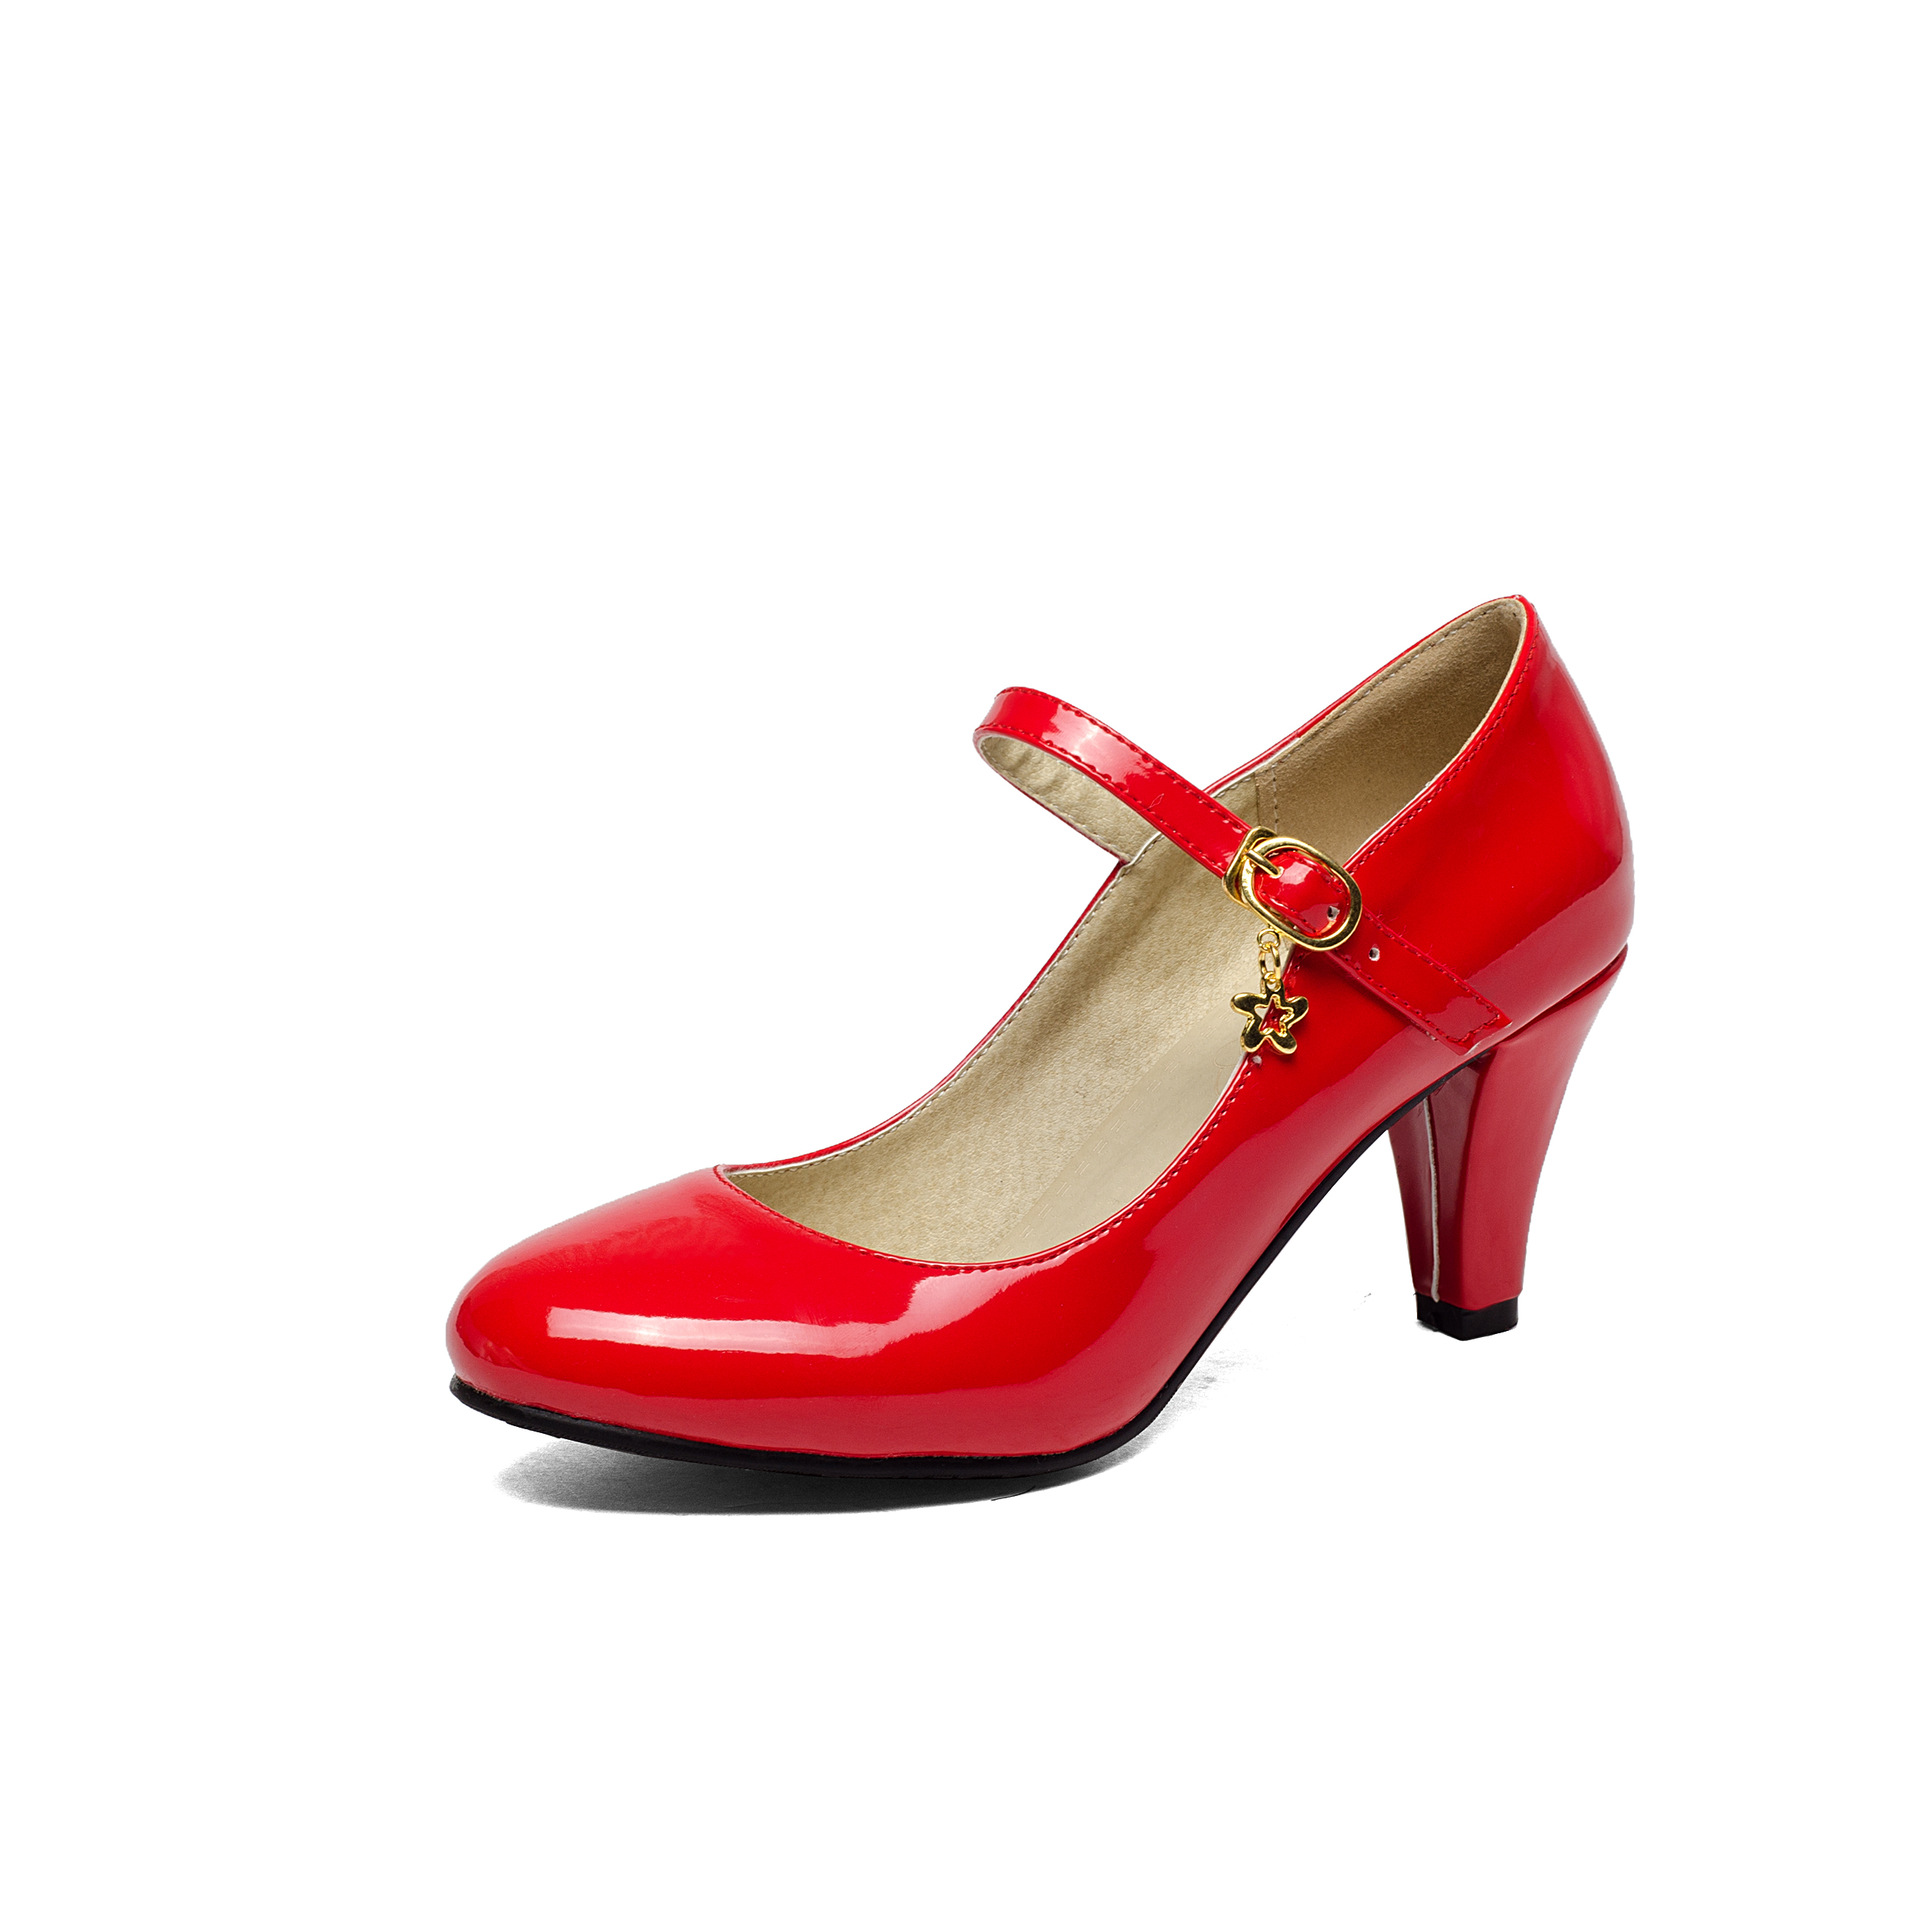 Women’s Dress Low Heels, Classic Velma Costume Shoes with Cheap Price ...